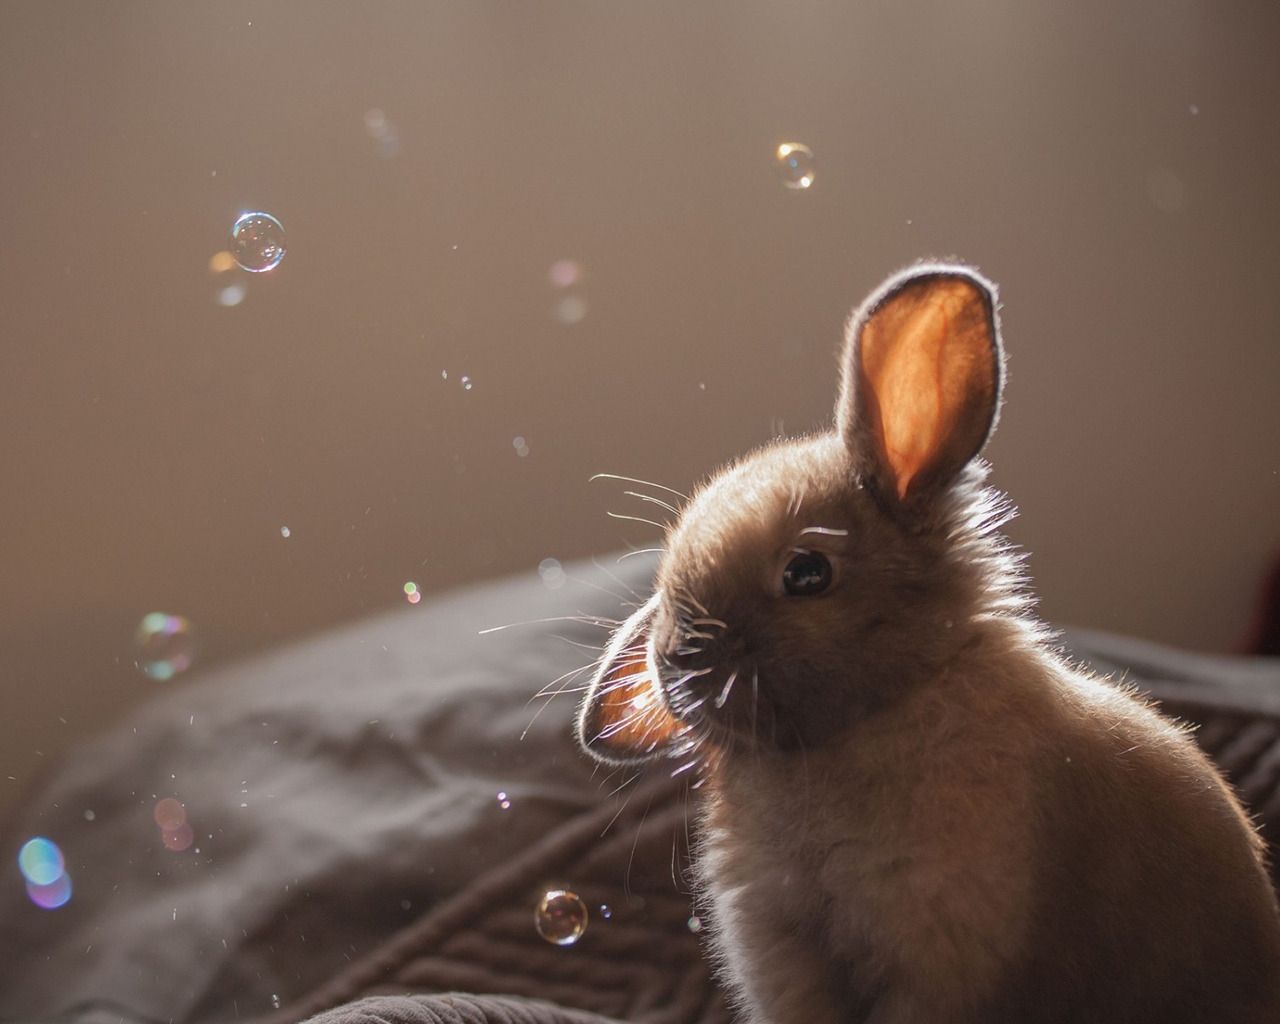 A rabbit sitting on a bed surrounded by bubbles - 1280x1024